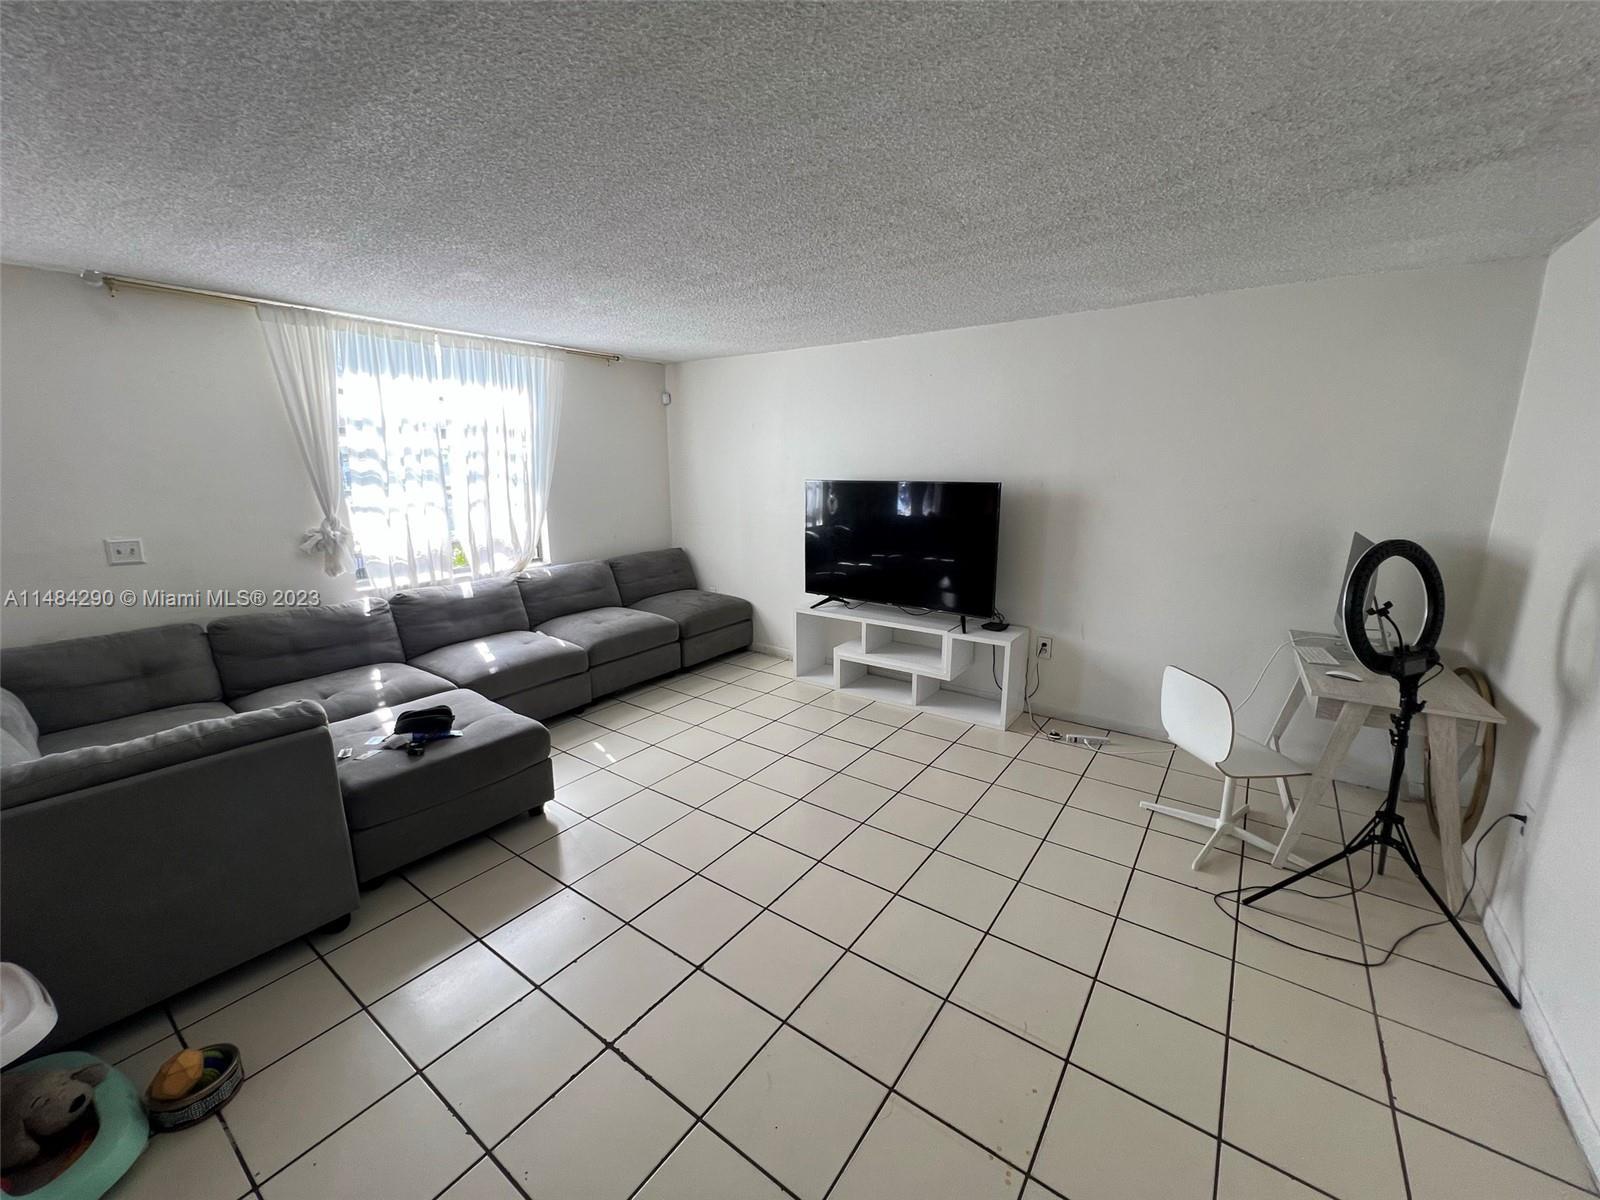 Photo of 1788 NW 55th Ave #202 in Lauderhill, FL